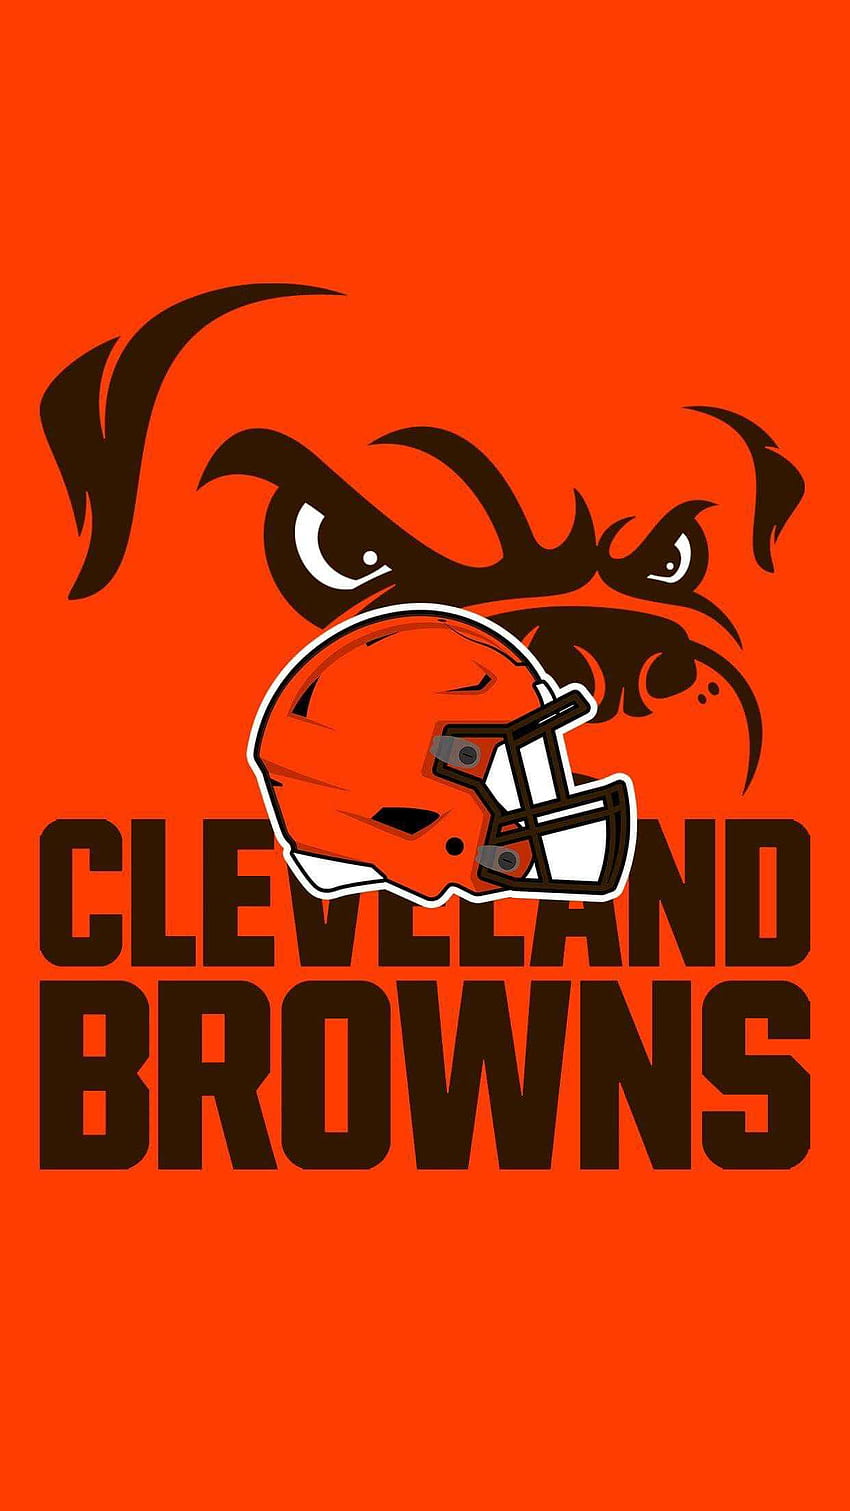 Cleveland Browns wallpaper for mobile phone tablet desktop computer and  other devices HD an  Cleveland browns wallpaper Cleveland browns logo Cleveland  browns